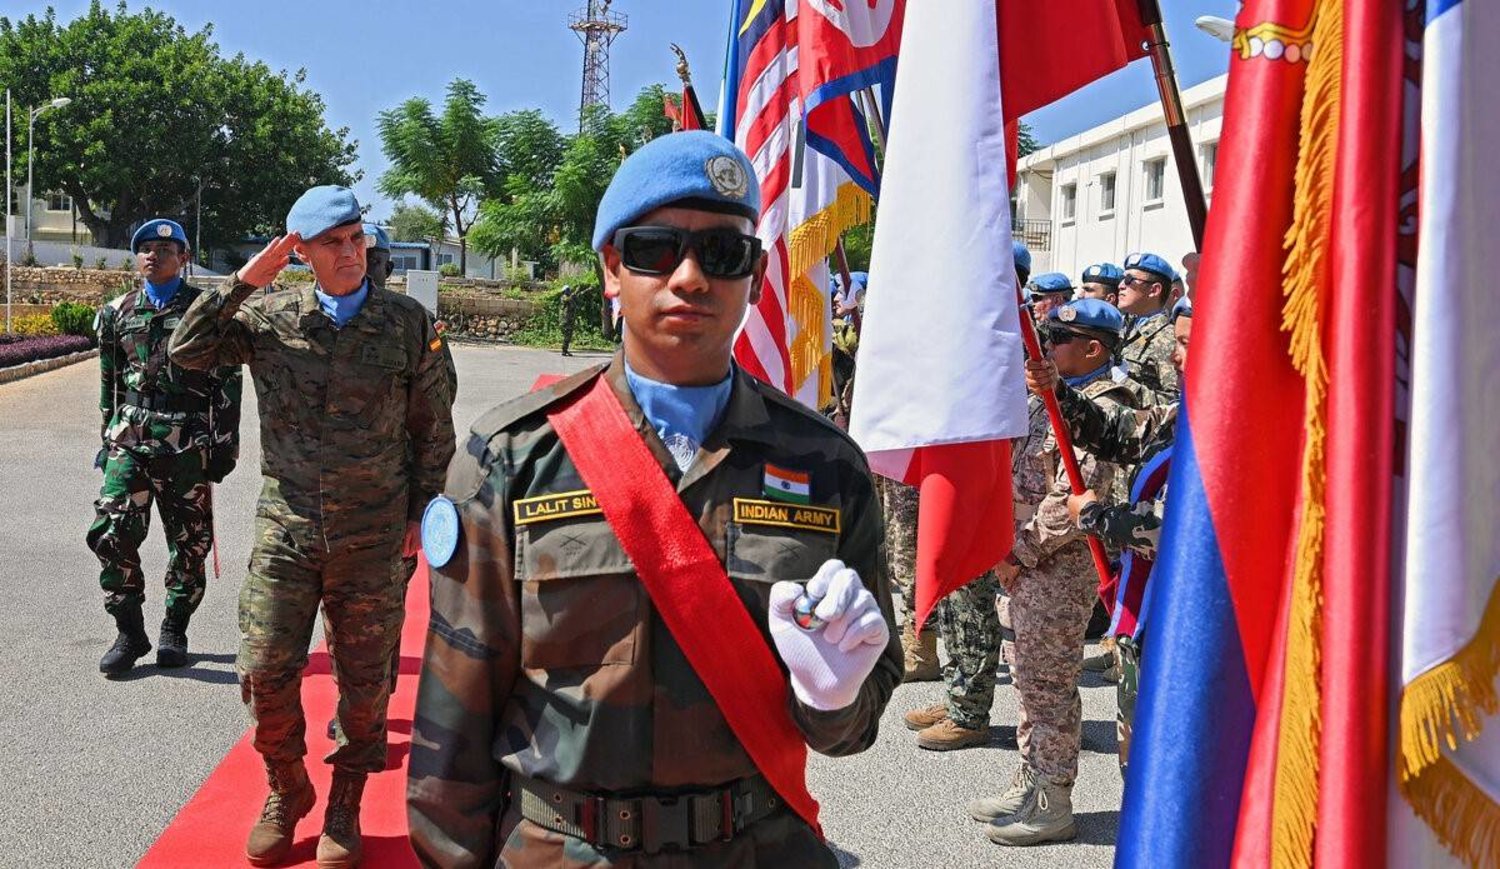 UNIFIL Head of Mission and Force Commander Major General Aroldo Lazaro arriving at the ceremony (UN)
